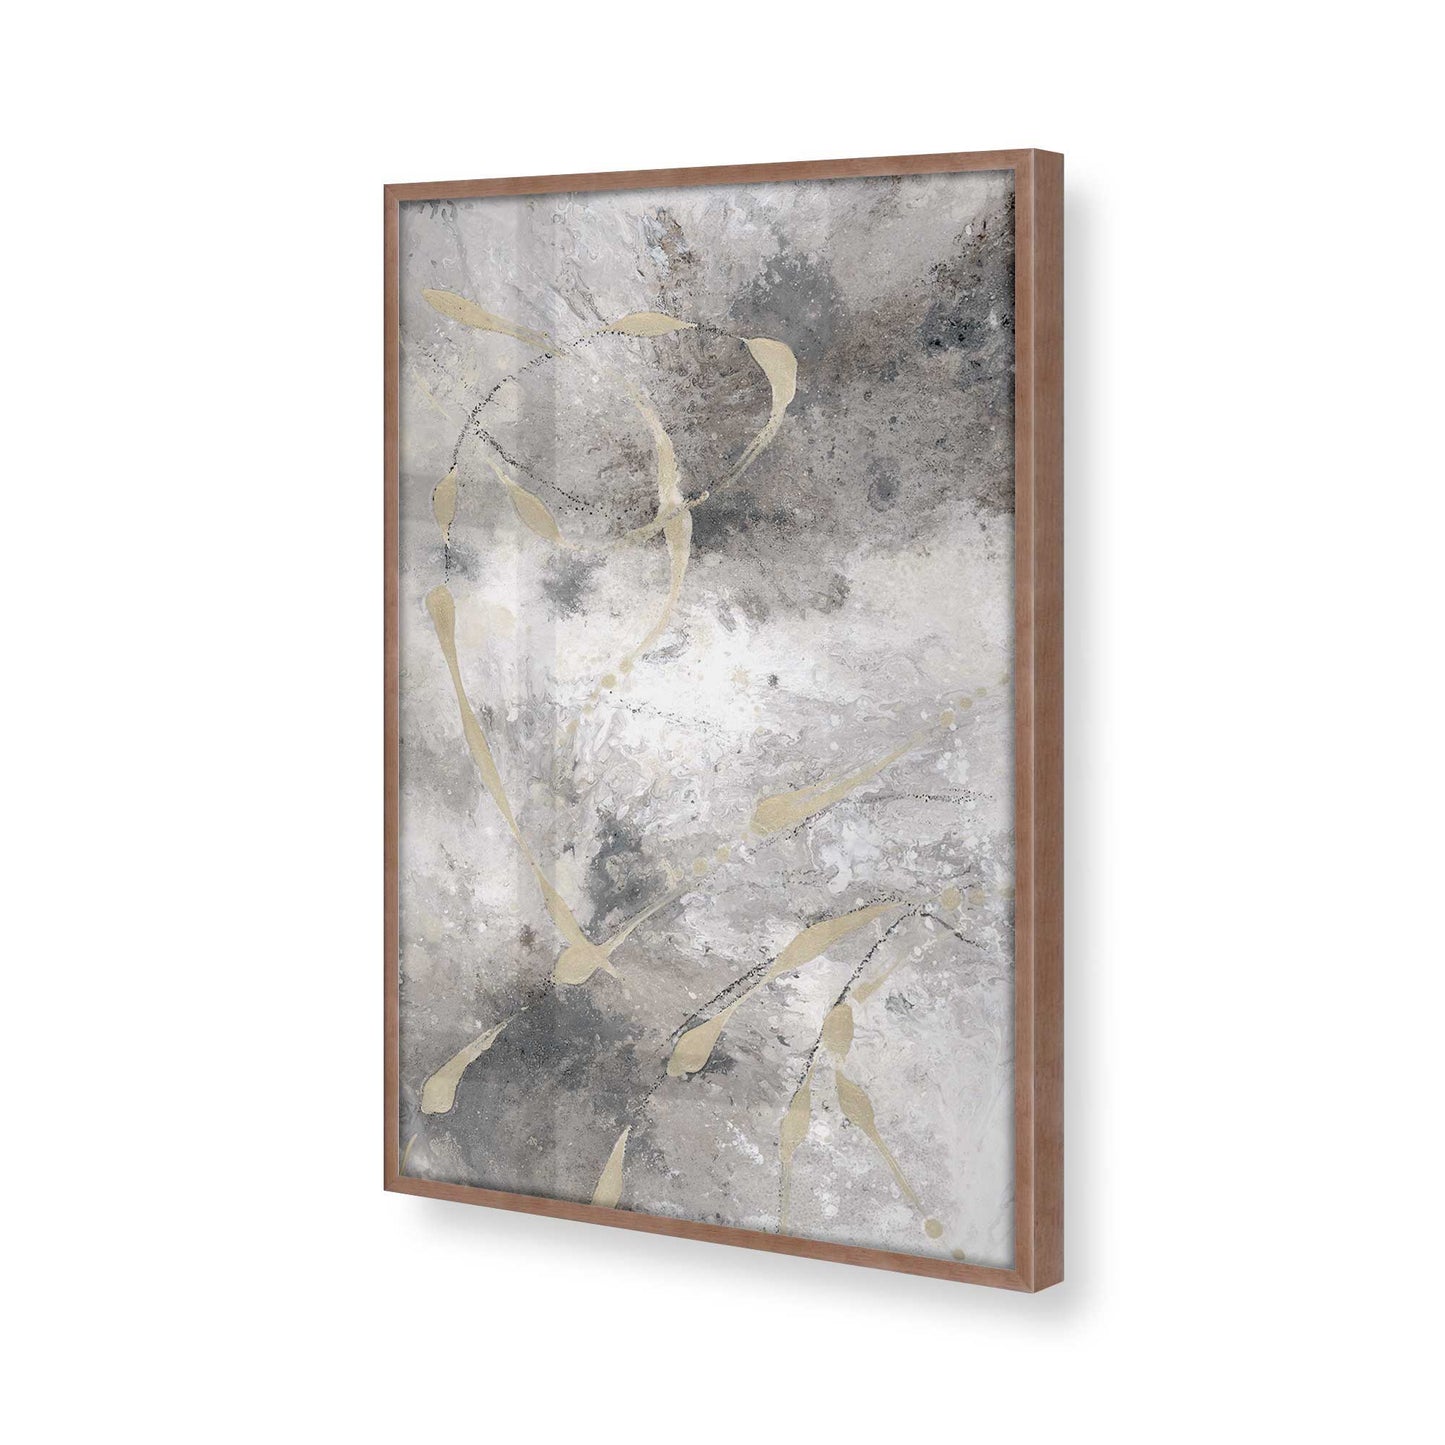 [Color:Powder Rose], Picture of art in a Powder Rose frame at an angle